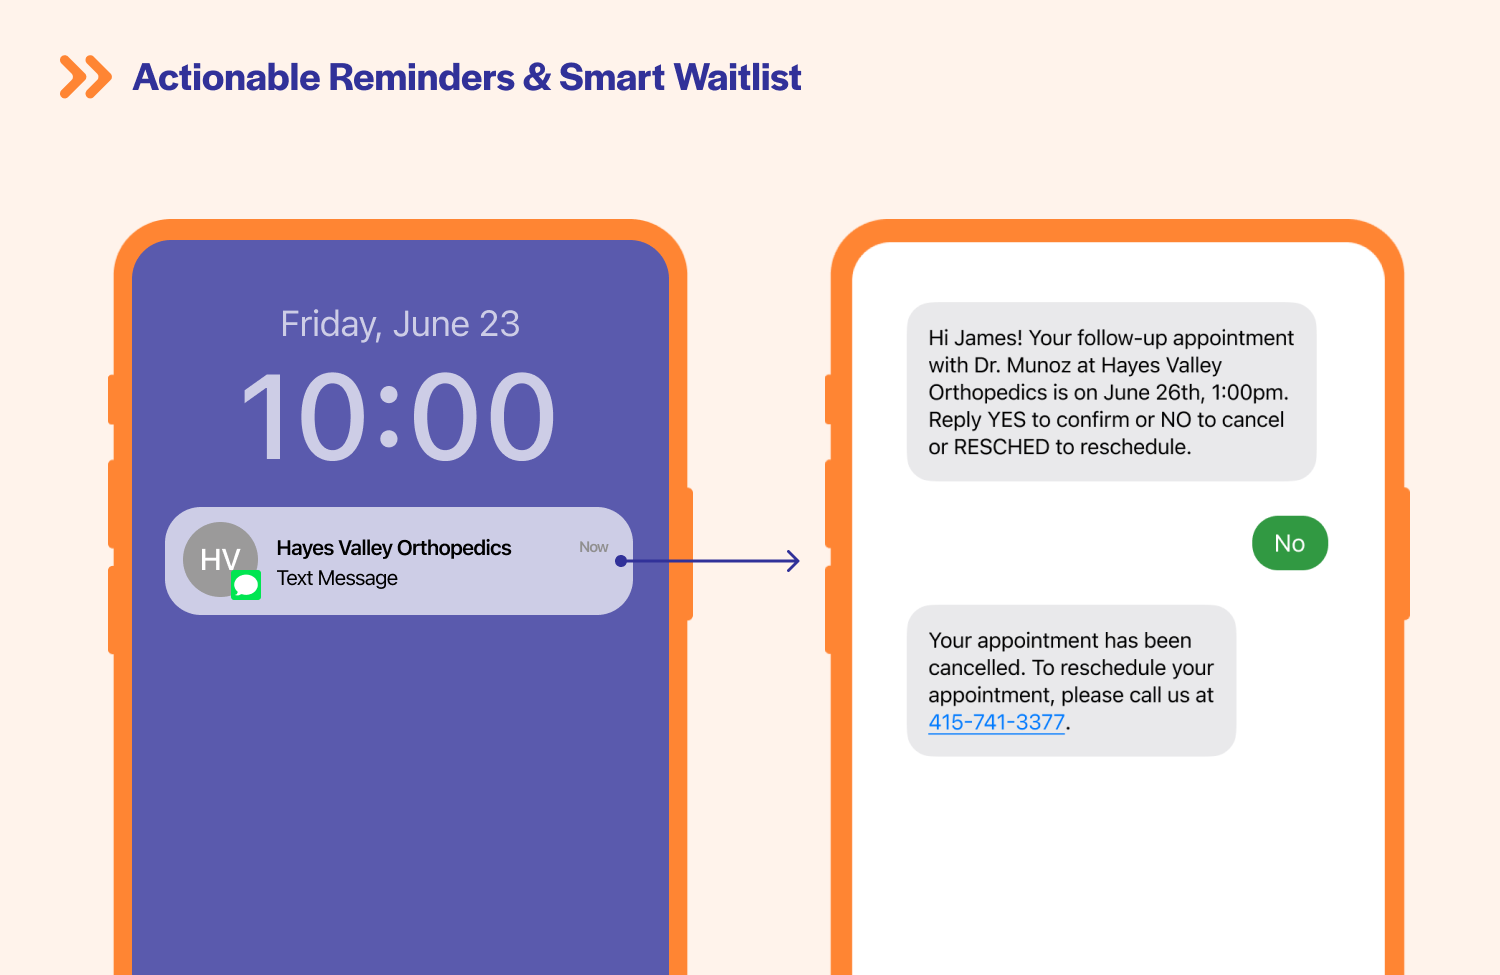 Actionable reminders keep the EHR schedule up to date with near-real time syncing when a patient confirms, cancels, or reschedules. Smart Waitlist automatically offers patients newly open slots to fill schedule gaps with no manual work from staff.